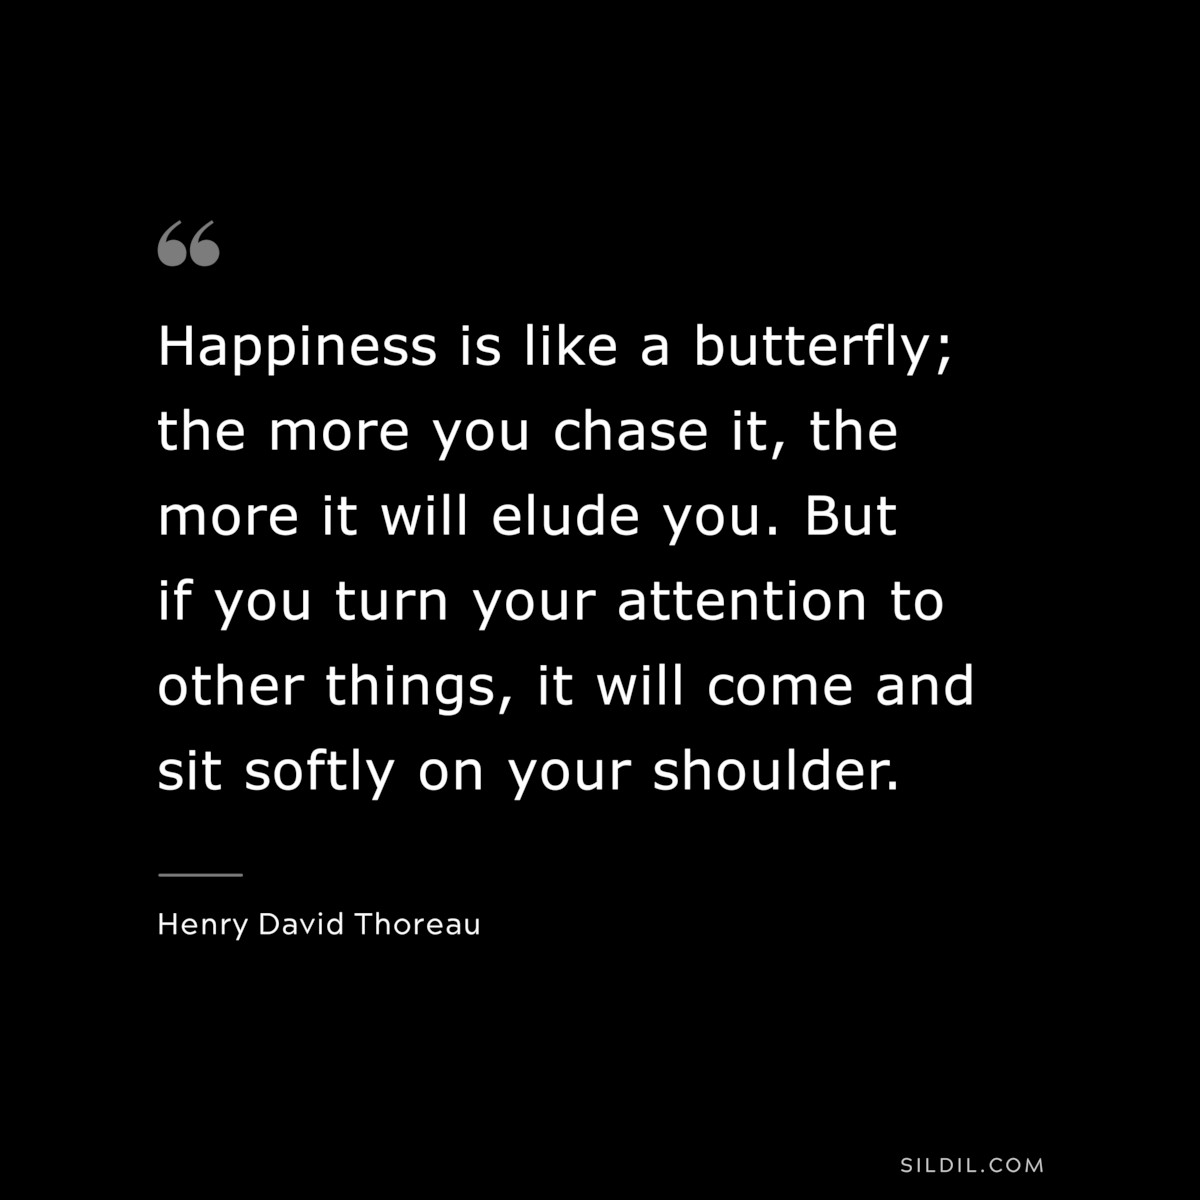 Happiness is like a butterfly; the more you chase it, the more it will elude you. But if you turn your attention to other things, it will come and sit softly on your shoulder. — Henry David Thoreau